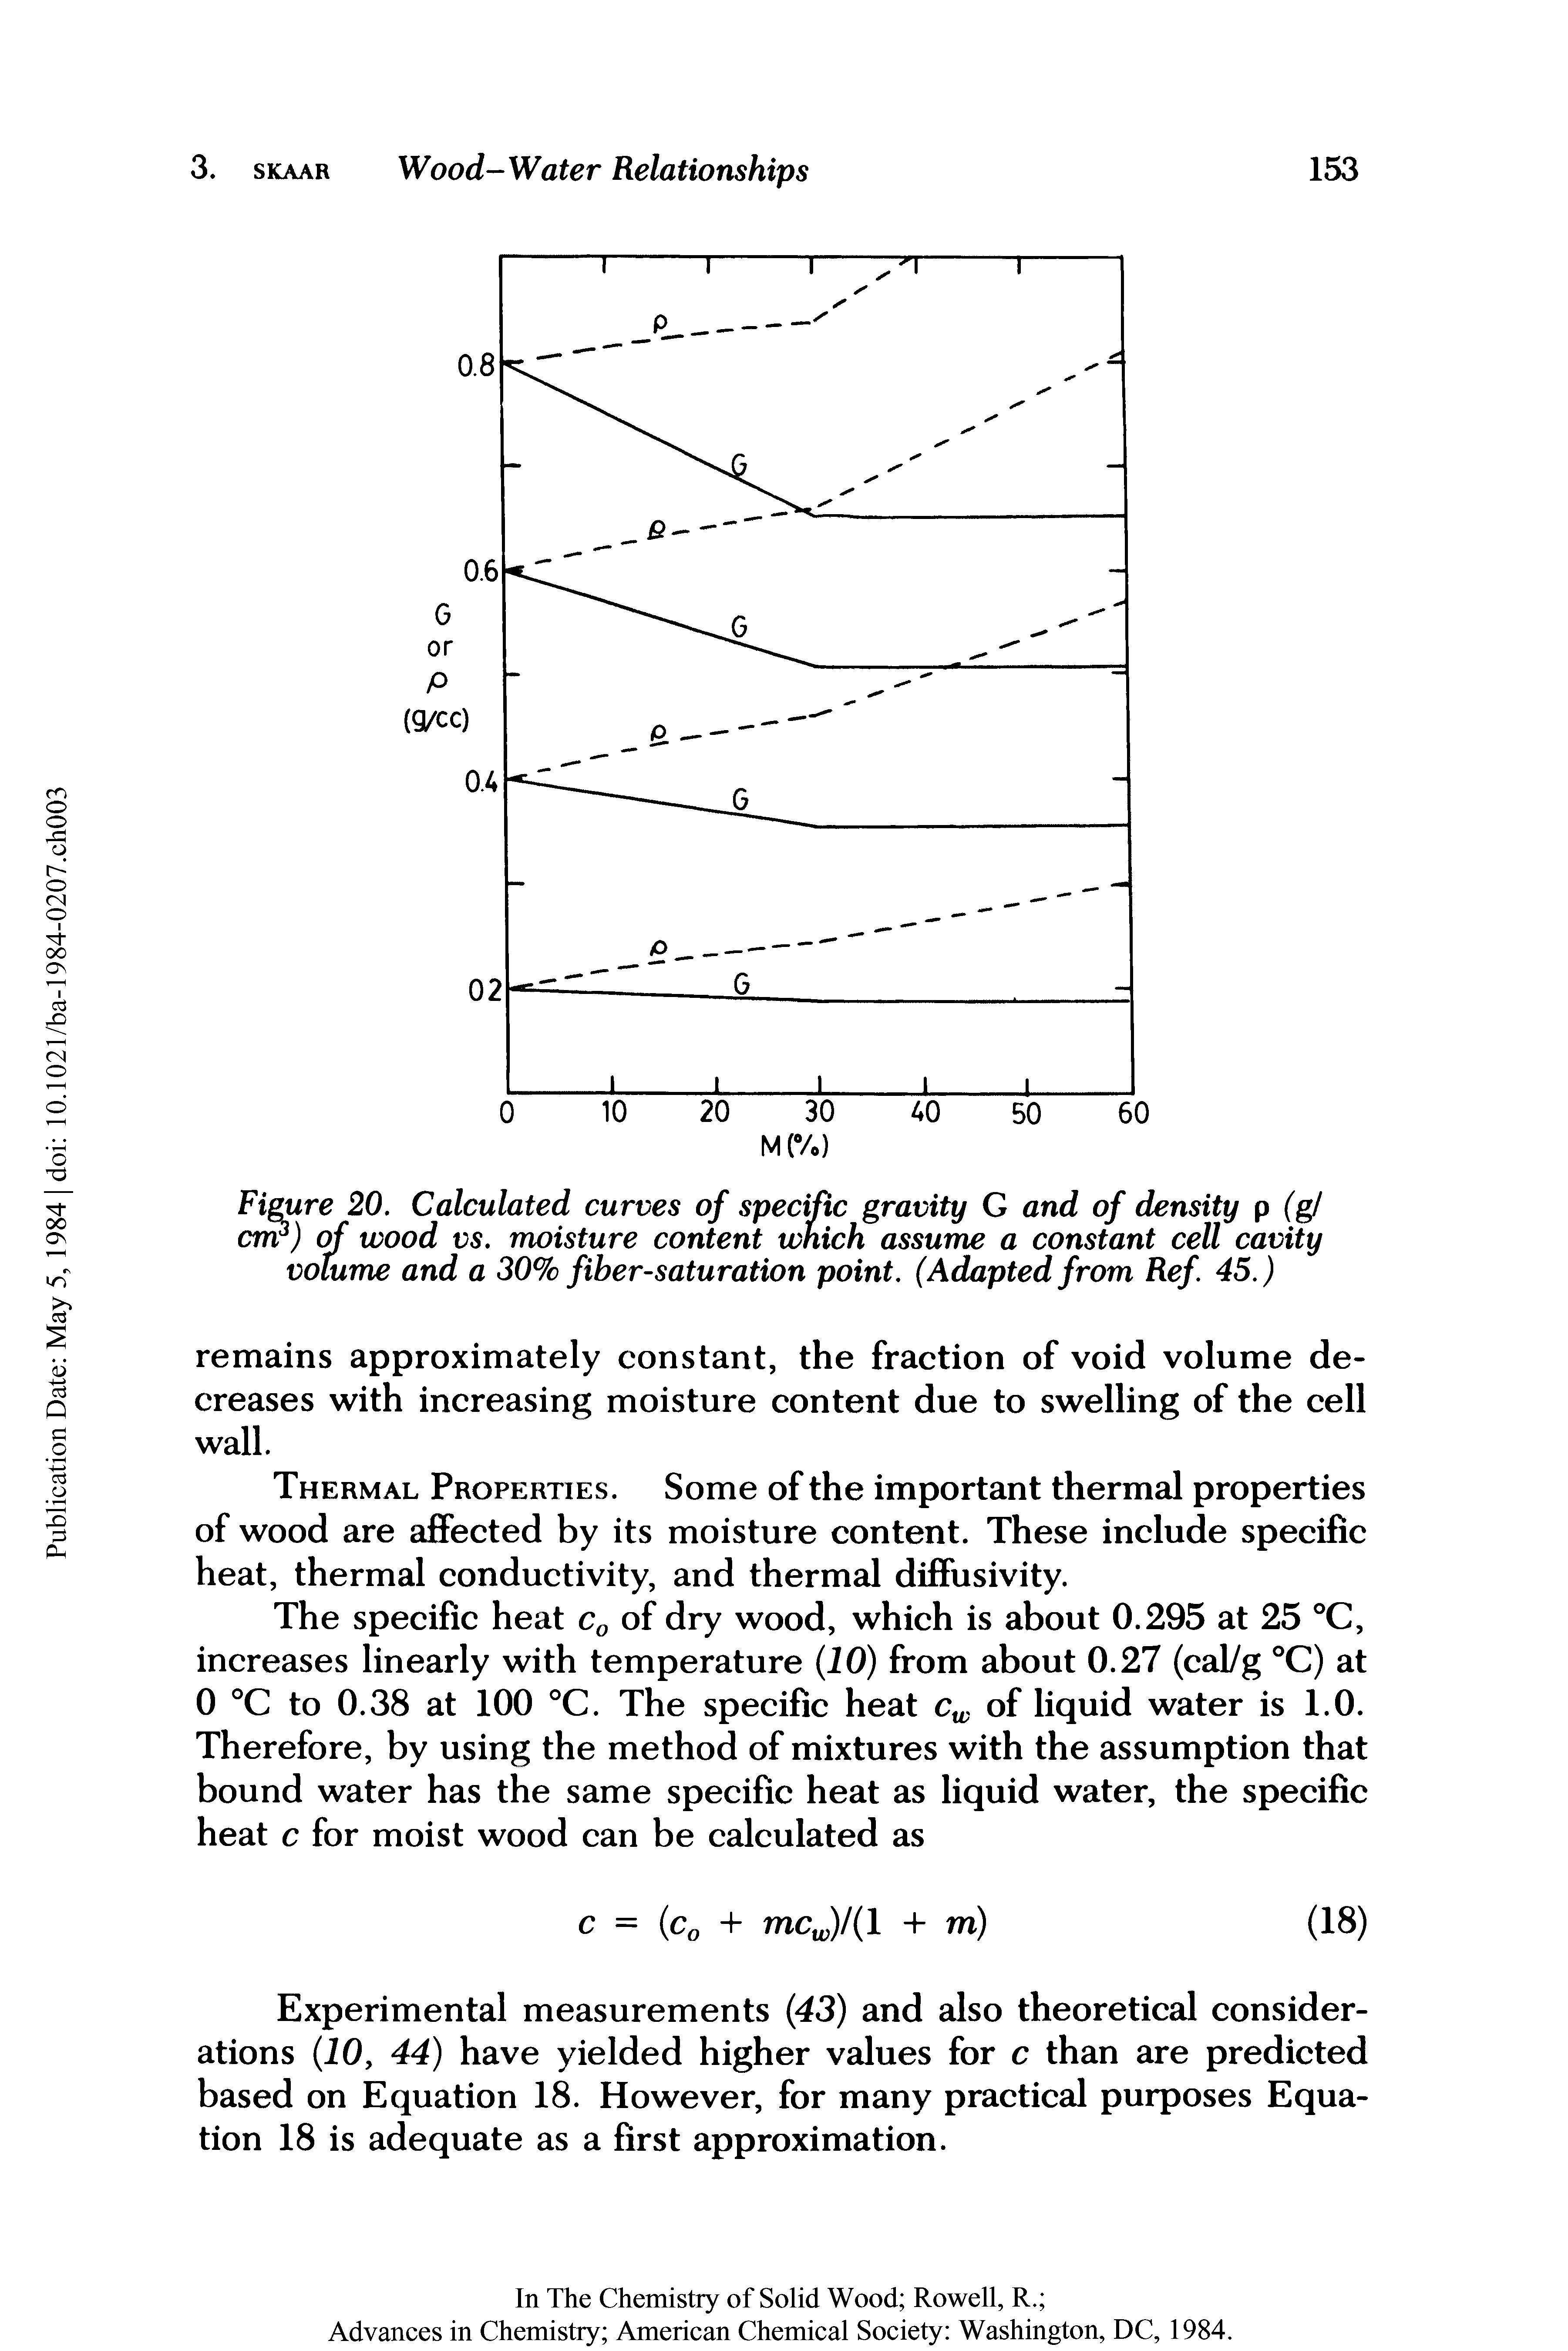 Figure 20. Calculated curves of specific gravity G and of density p (gj cmr) of wood vs. moisture content which assume a constant cell cavity volume and a 30% fiber-saturation point. (Adupted from Ref 45.)...